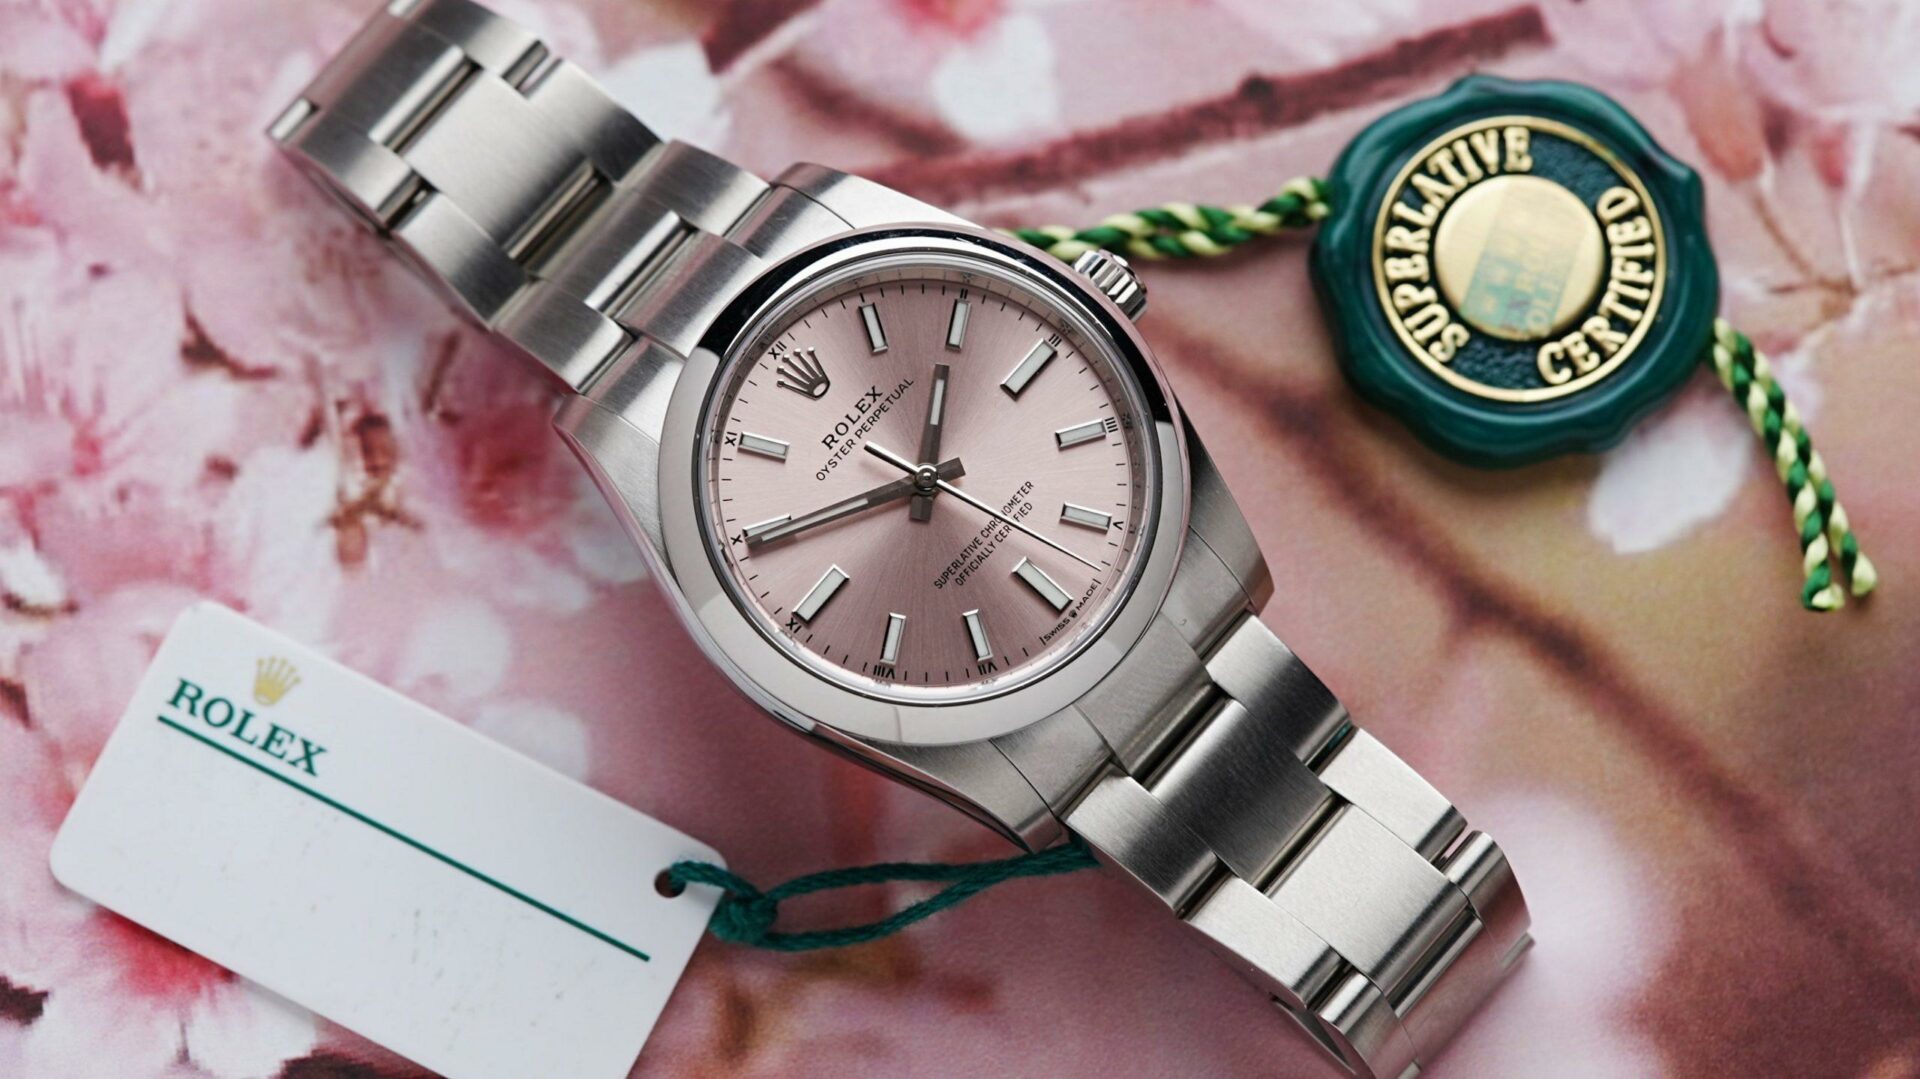 Rolex Oyster Perpetual 34 Pink Dial 2022 featured on pink flowers.